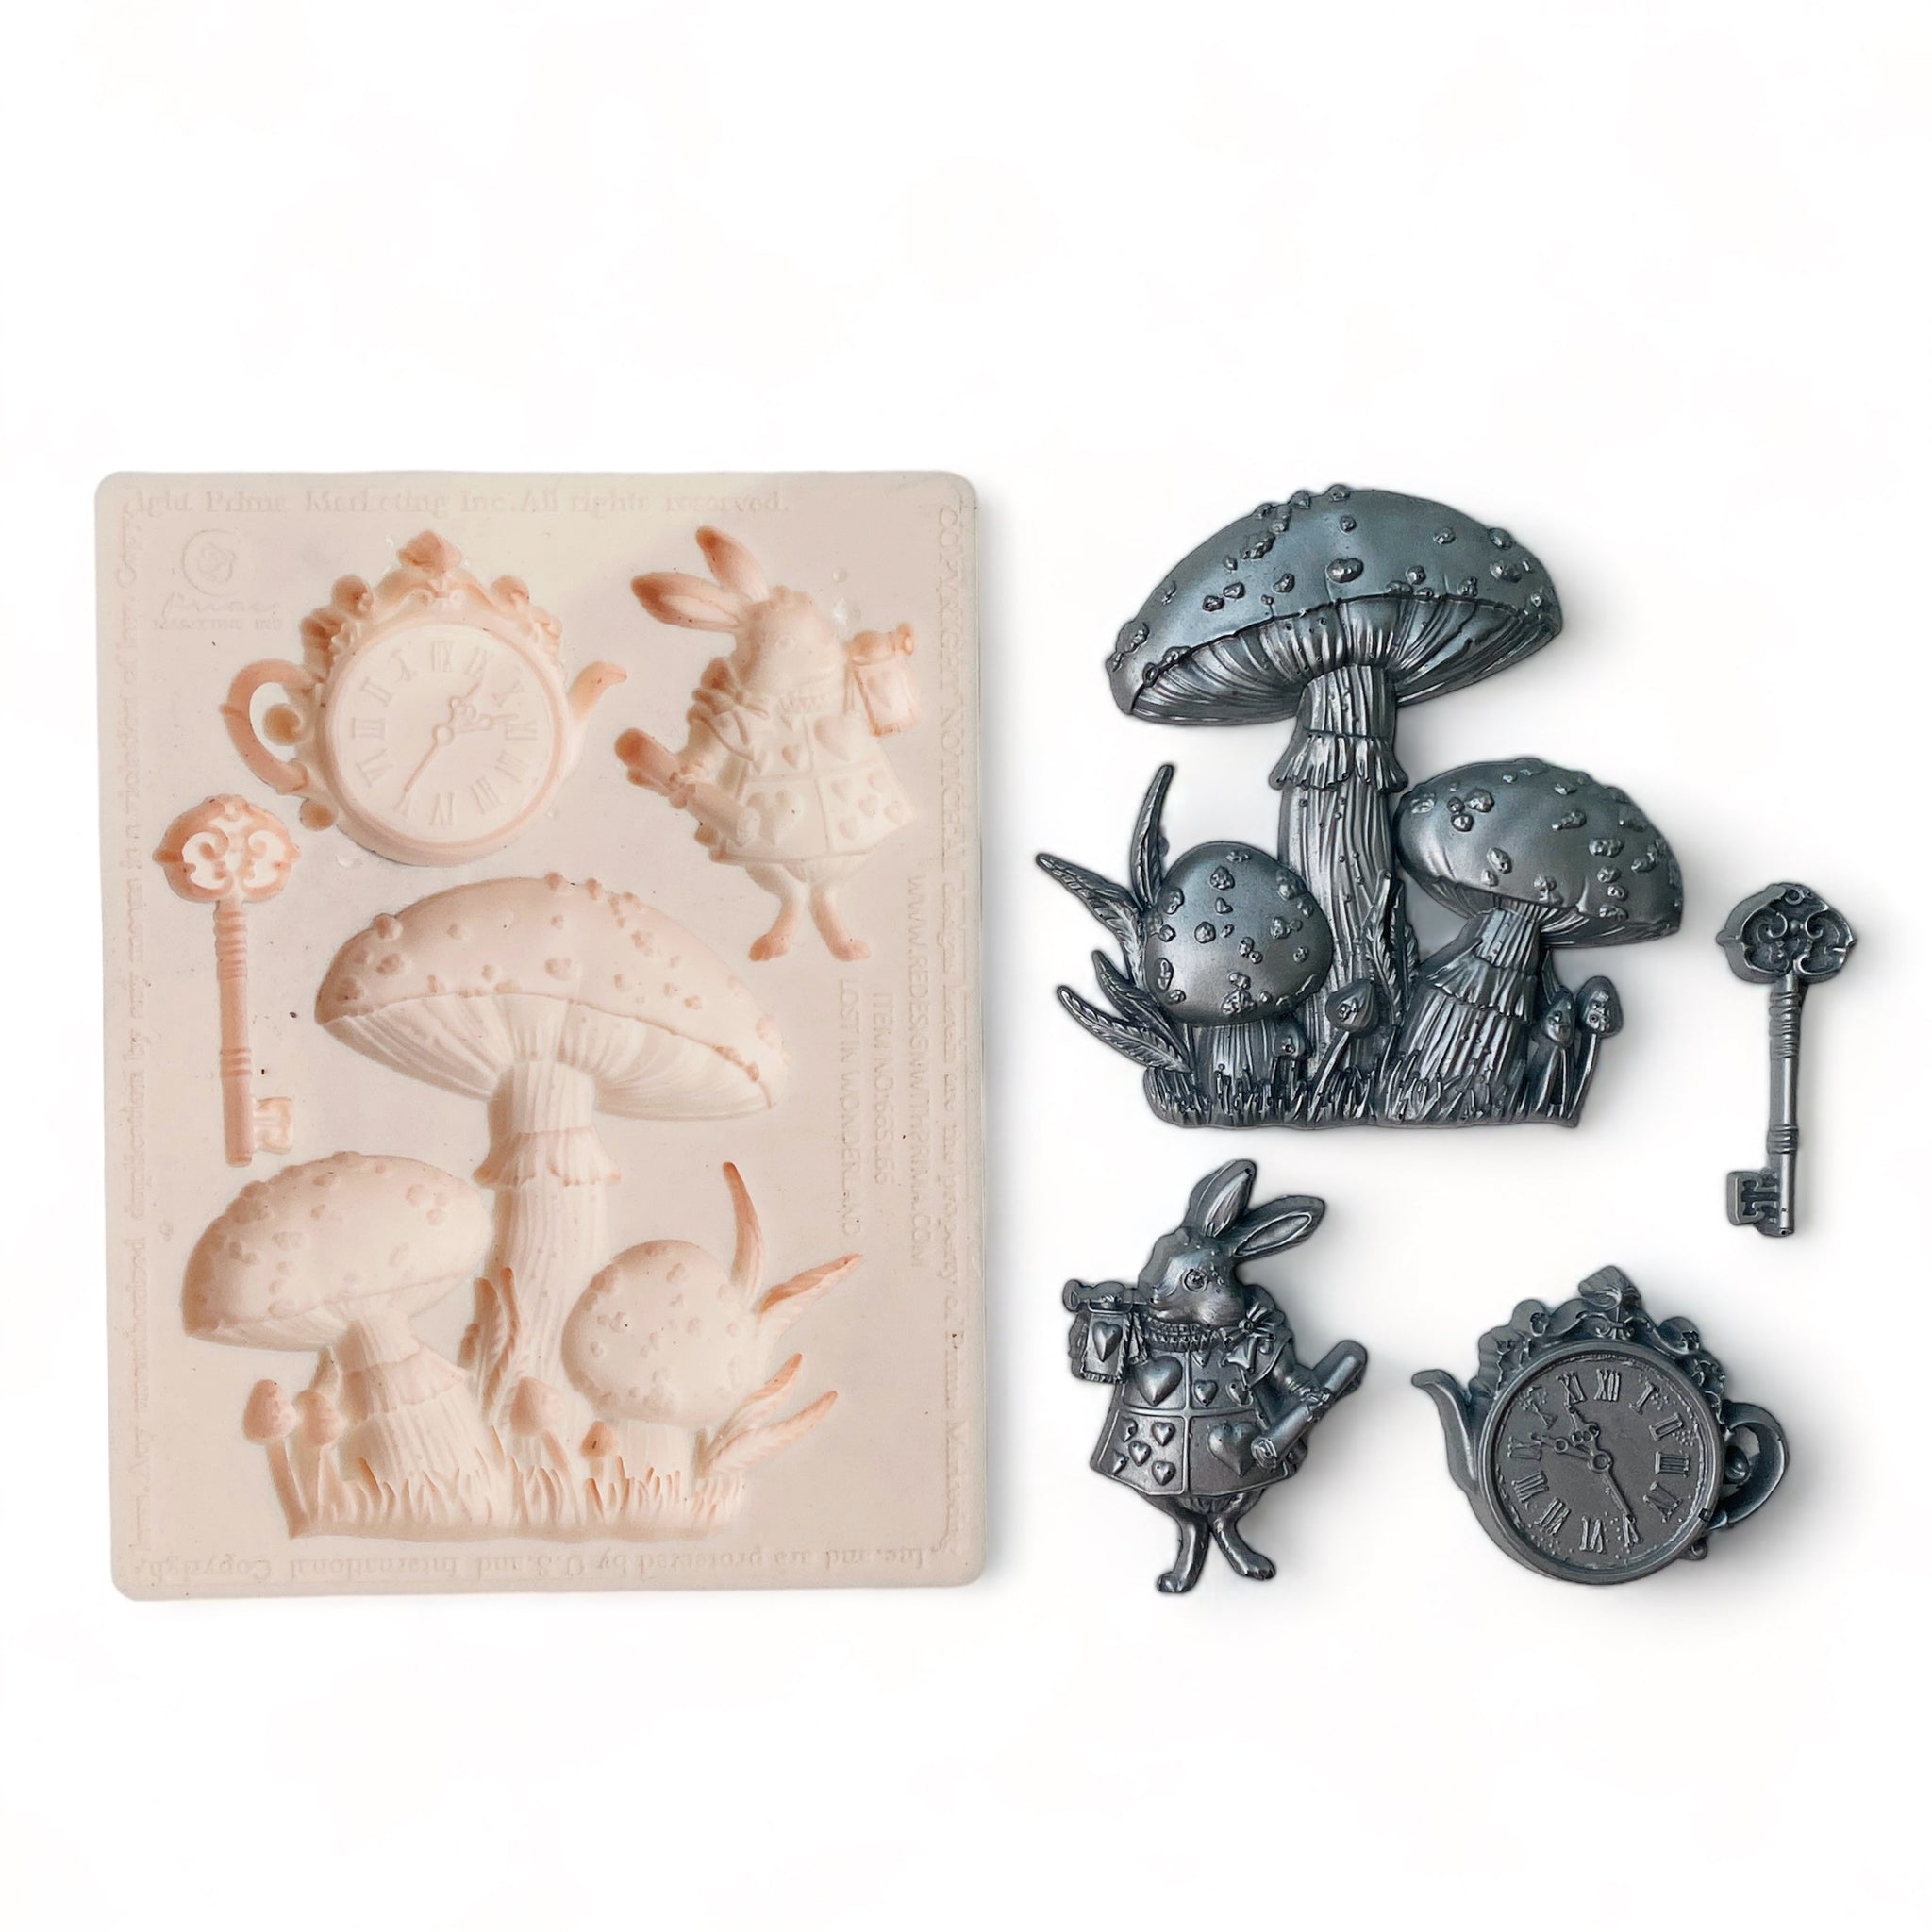 A beige silicone mold and silver colored castings of Alice in Wonderland pieces including a key, teacup clock, mushrooms, and the White Rabbit are against a white background.